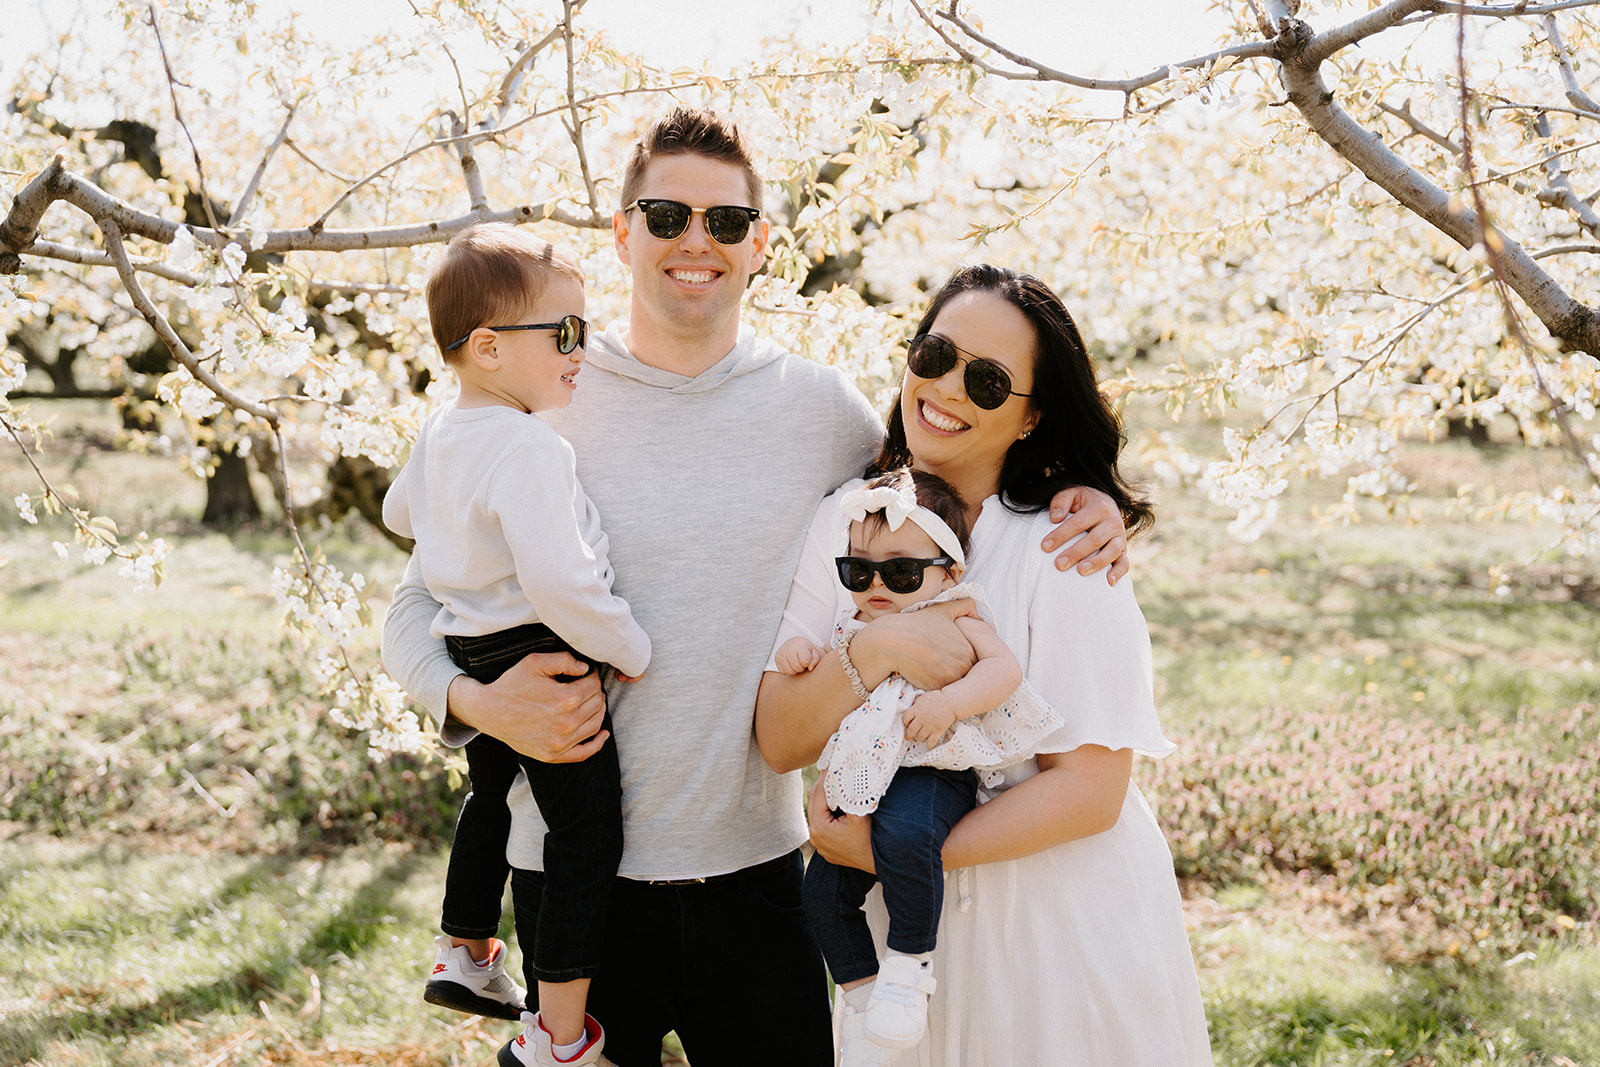 Family of four standing underneath cherry blossom trees with sunglasses on.